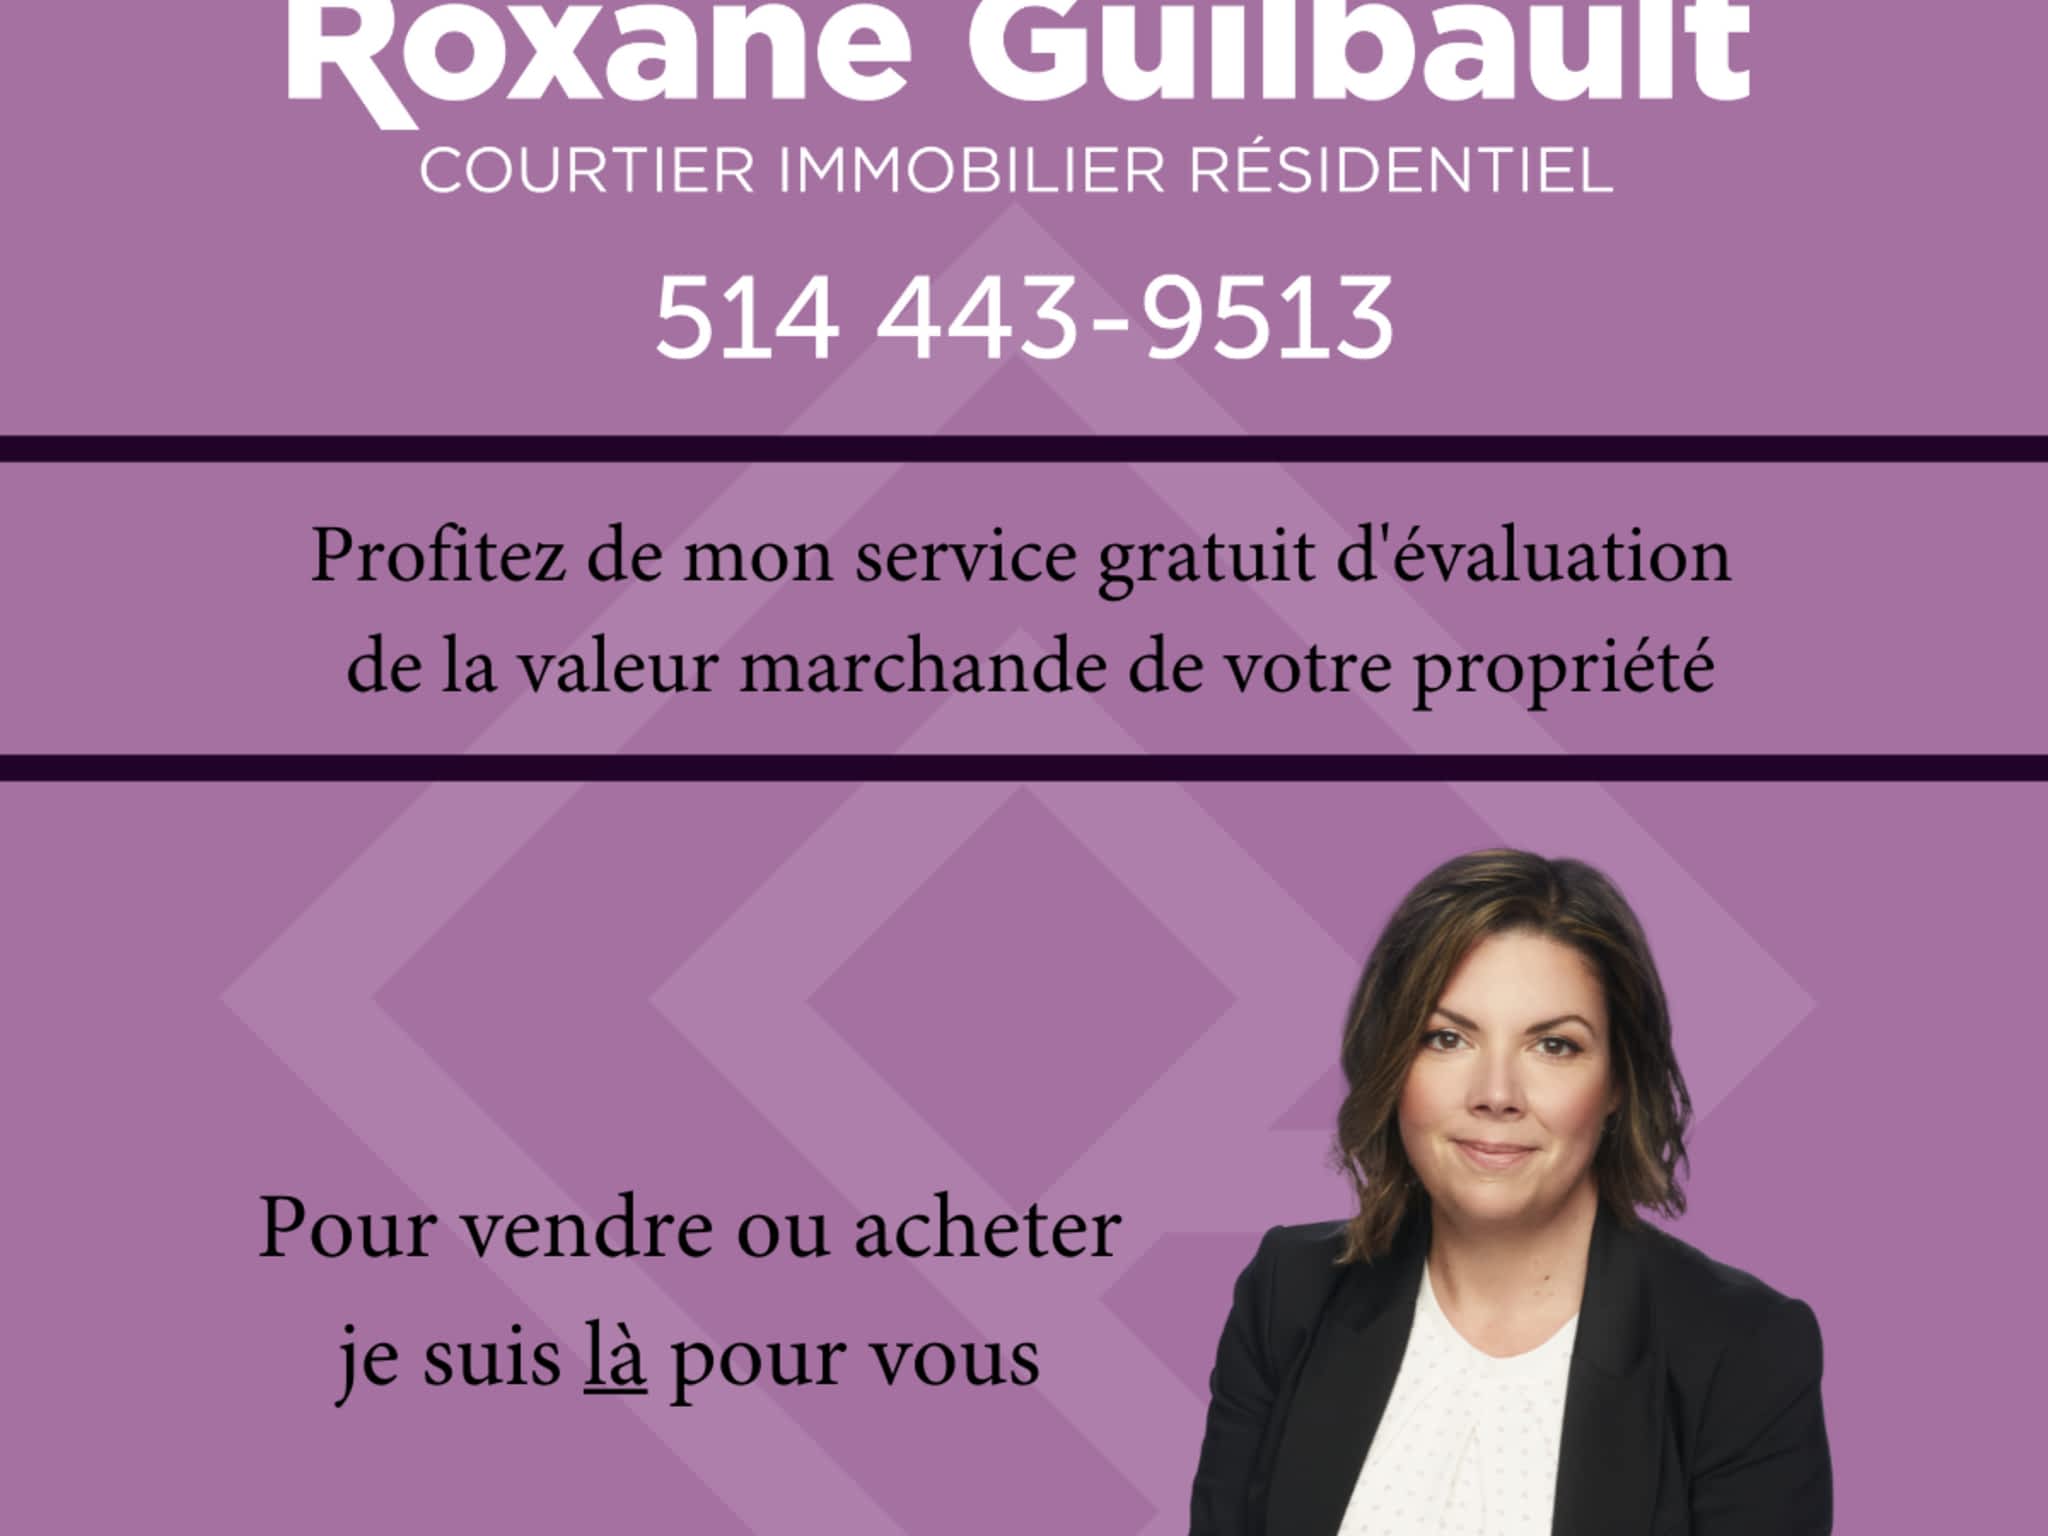 photo Roxane Guilbault Courtier Immobilier